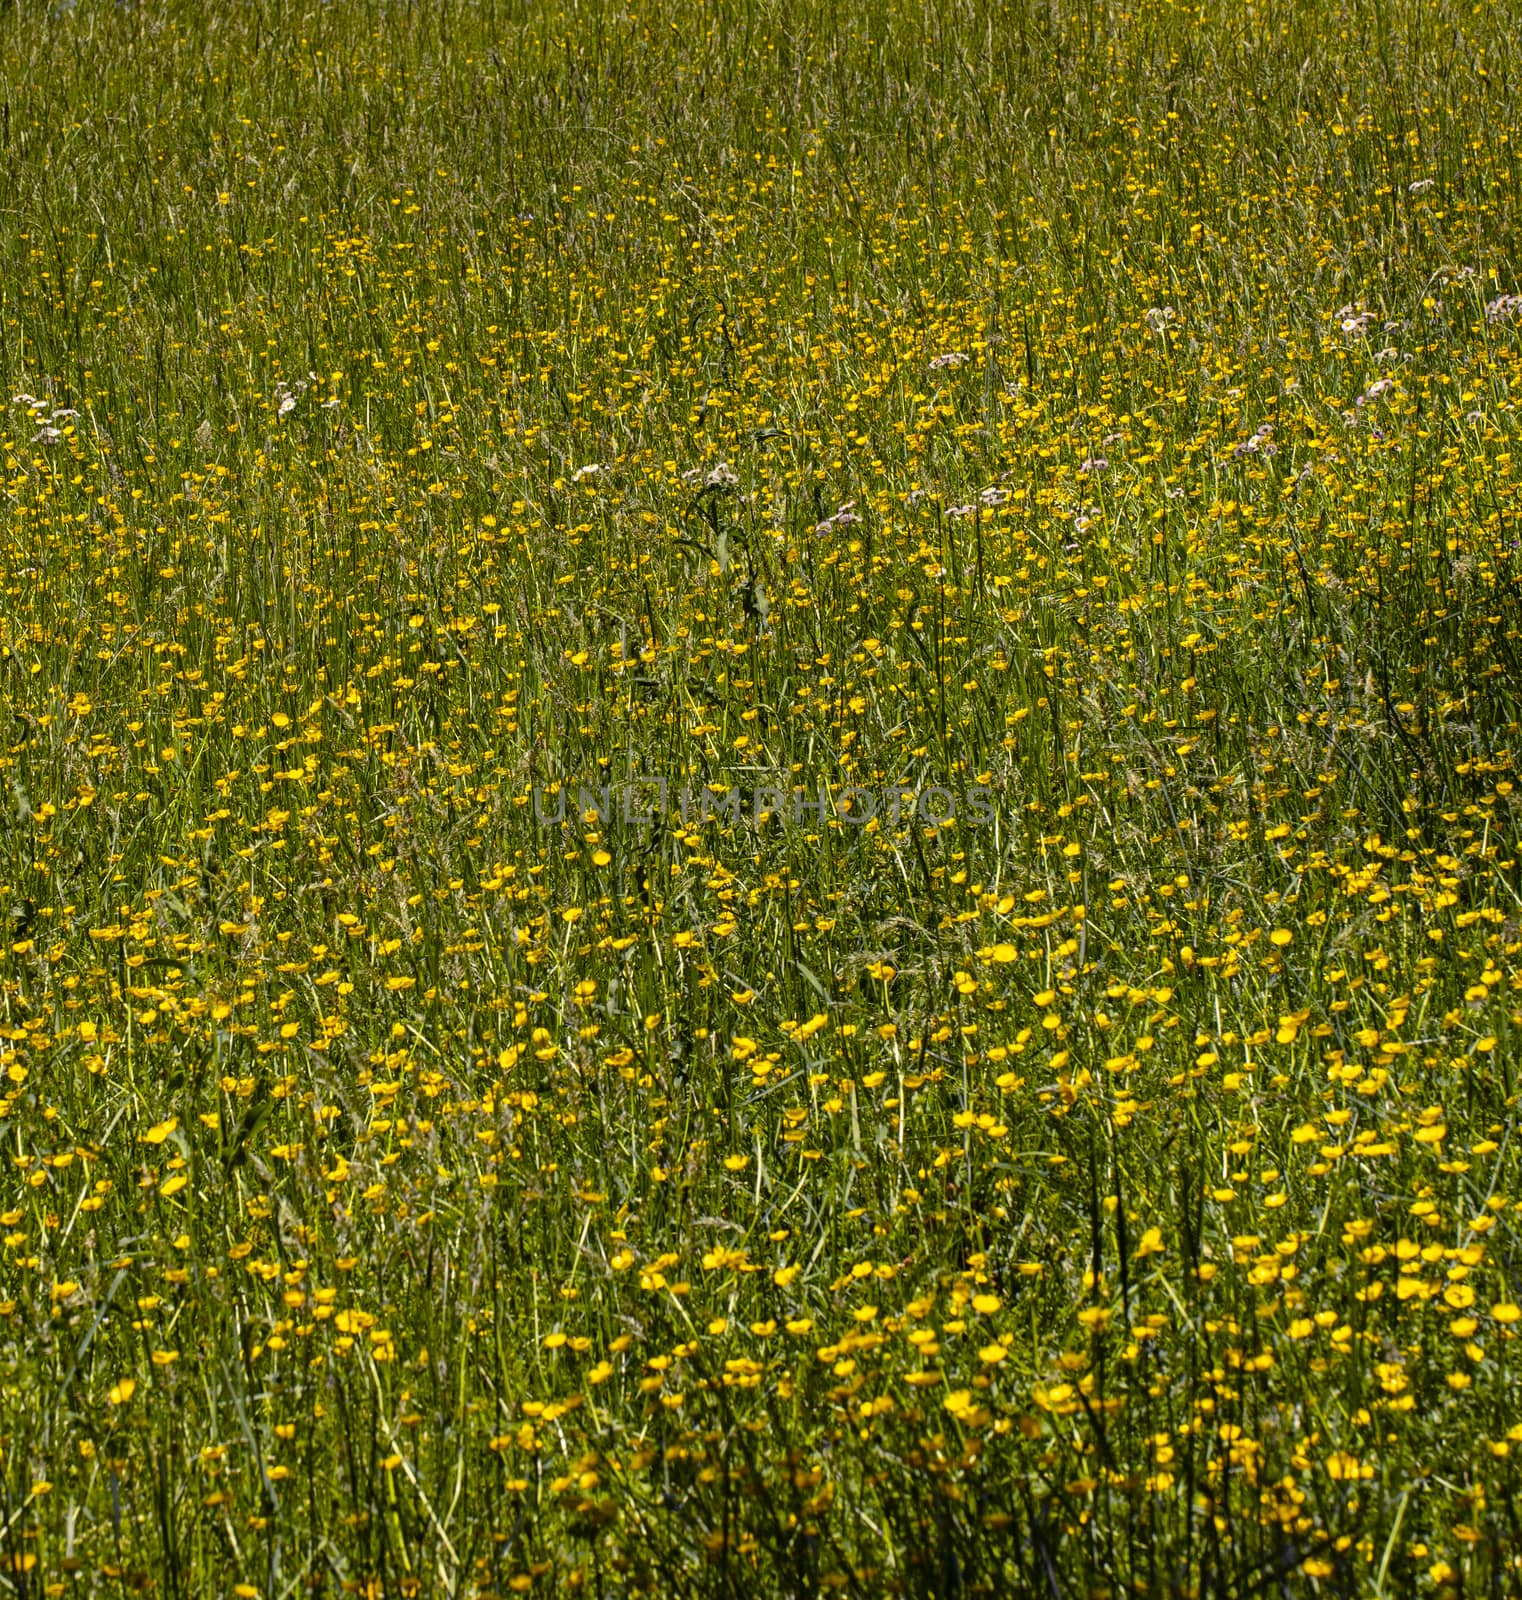 Yellow-carpeted Horse Pasture by CharlieFloyd